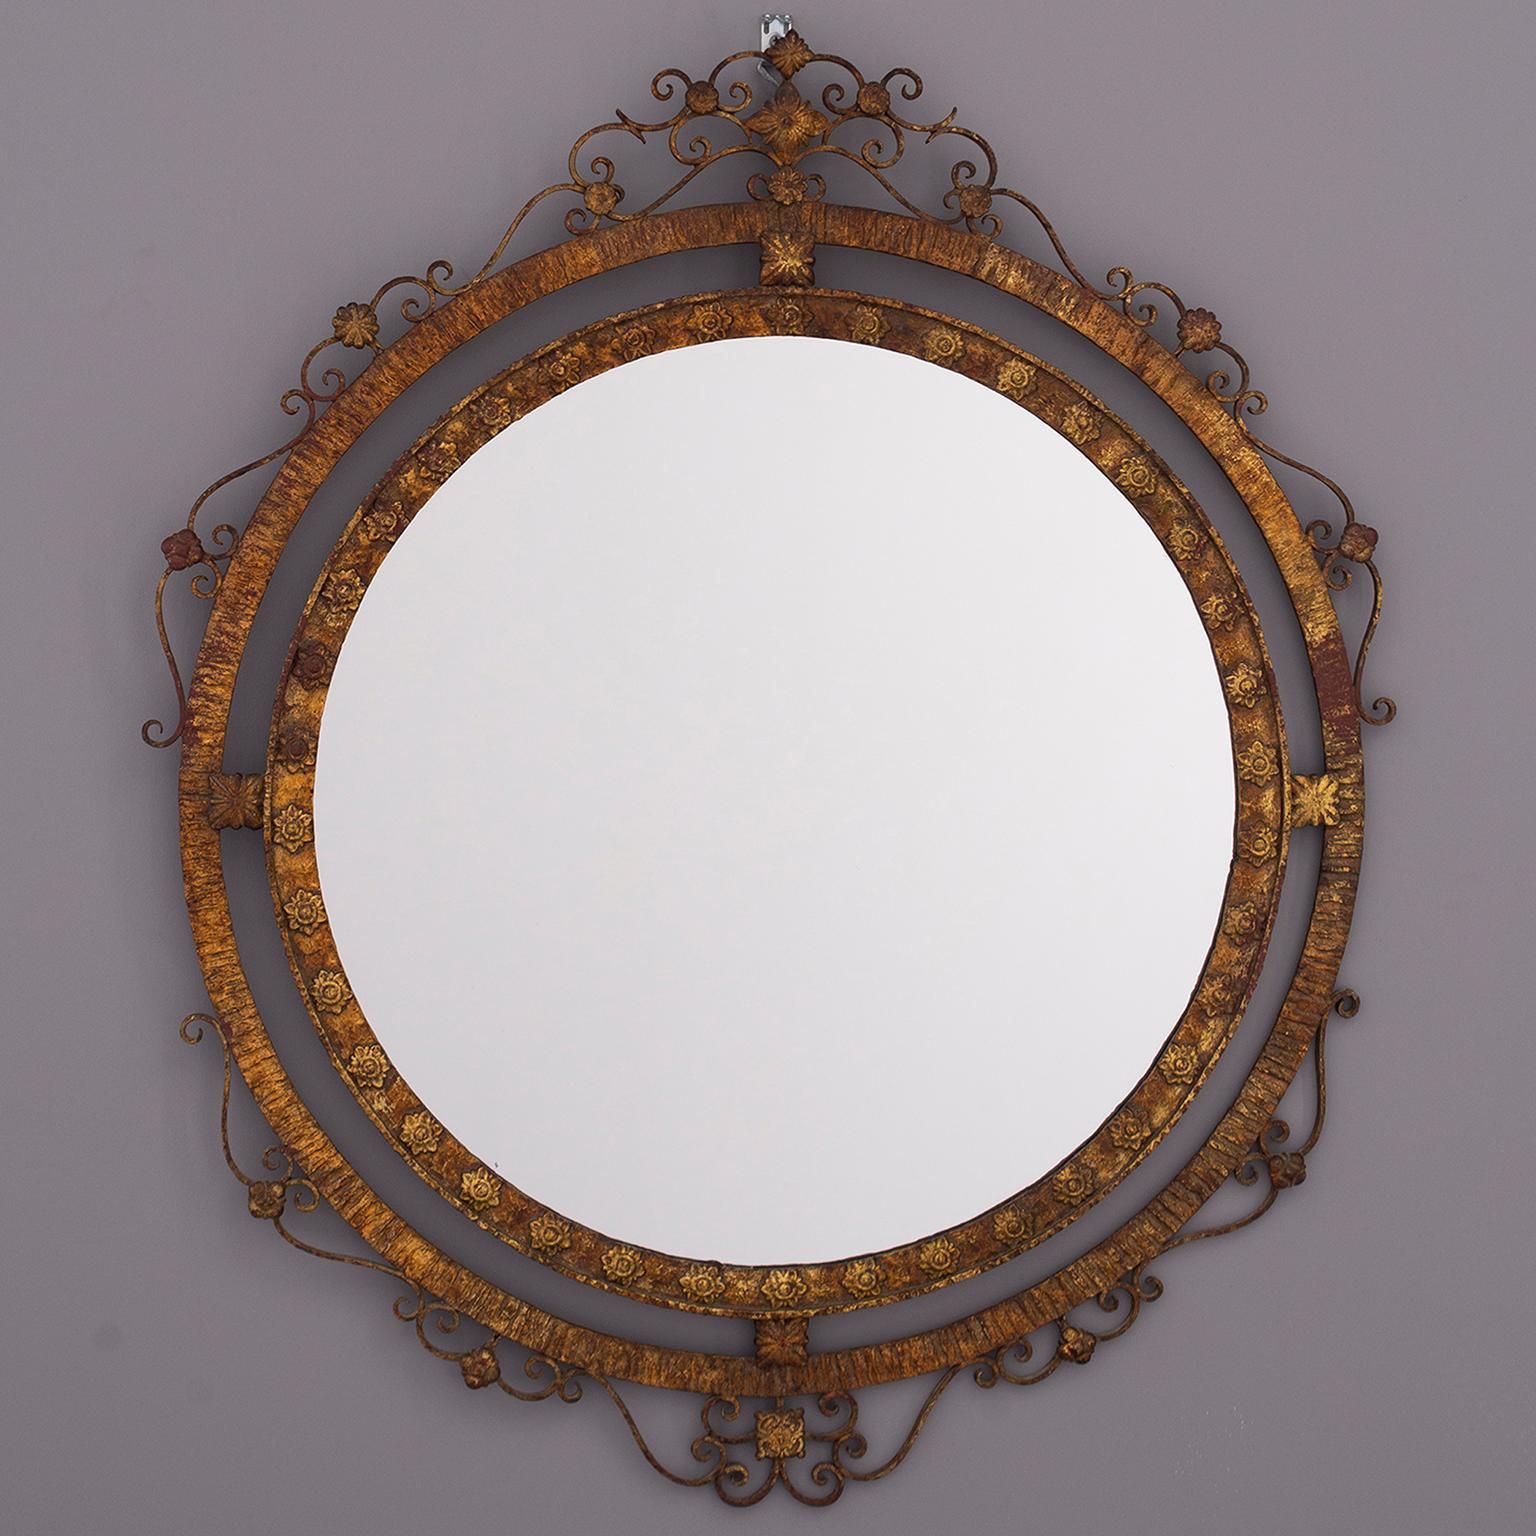 Round Spanish mirror has a gilded iron frame with a decorative crest and double, open work edge, circa 1930s. Unknown maker.